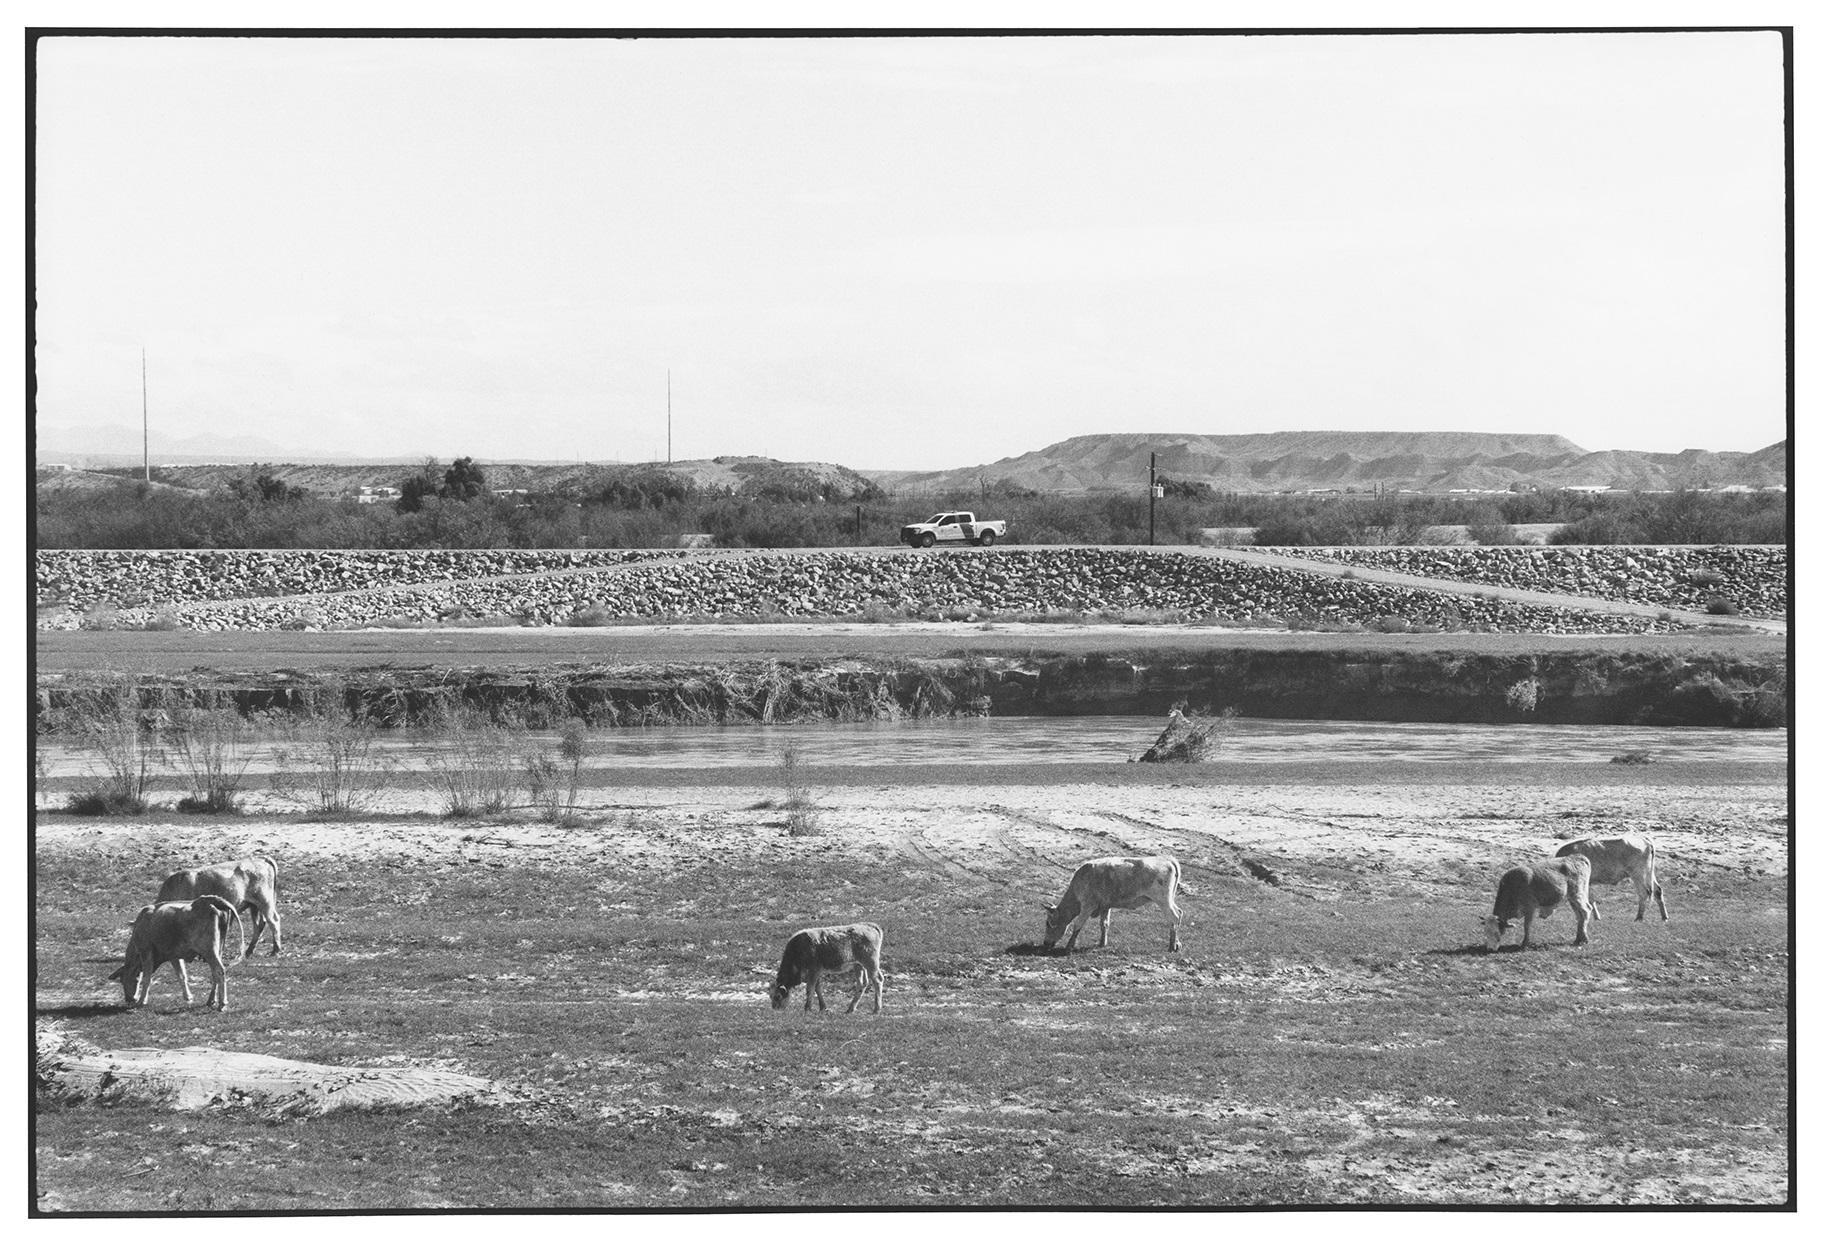 Black-and-white photograph of a desert landscape with a truck on a roadway in the background and cows grazing in the foreground